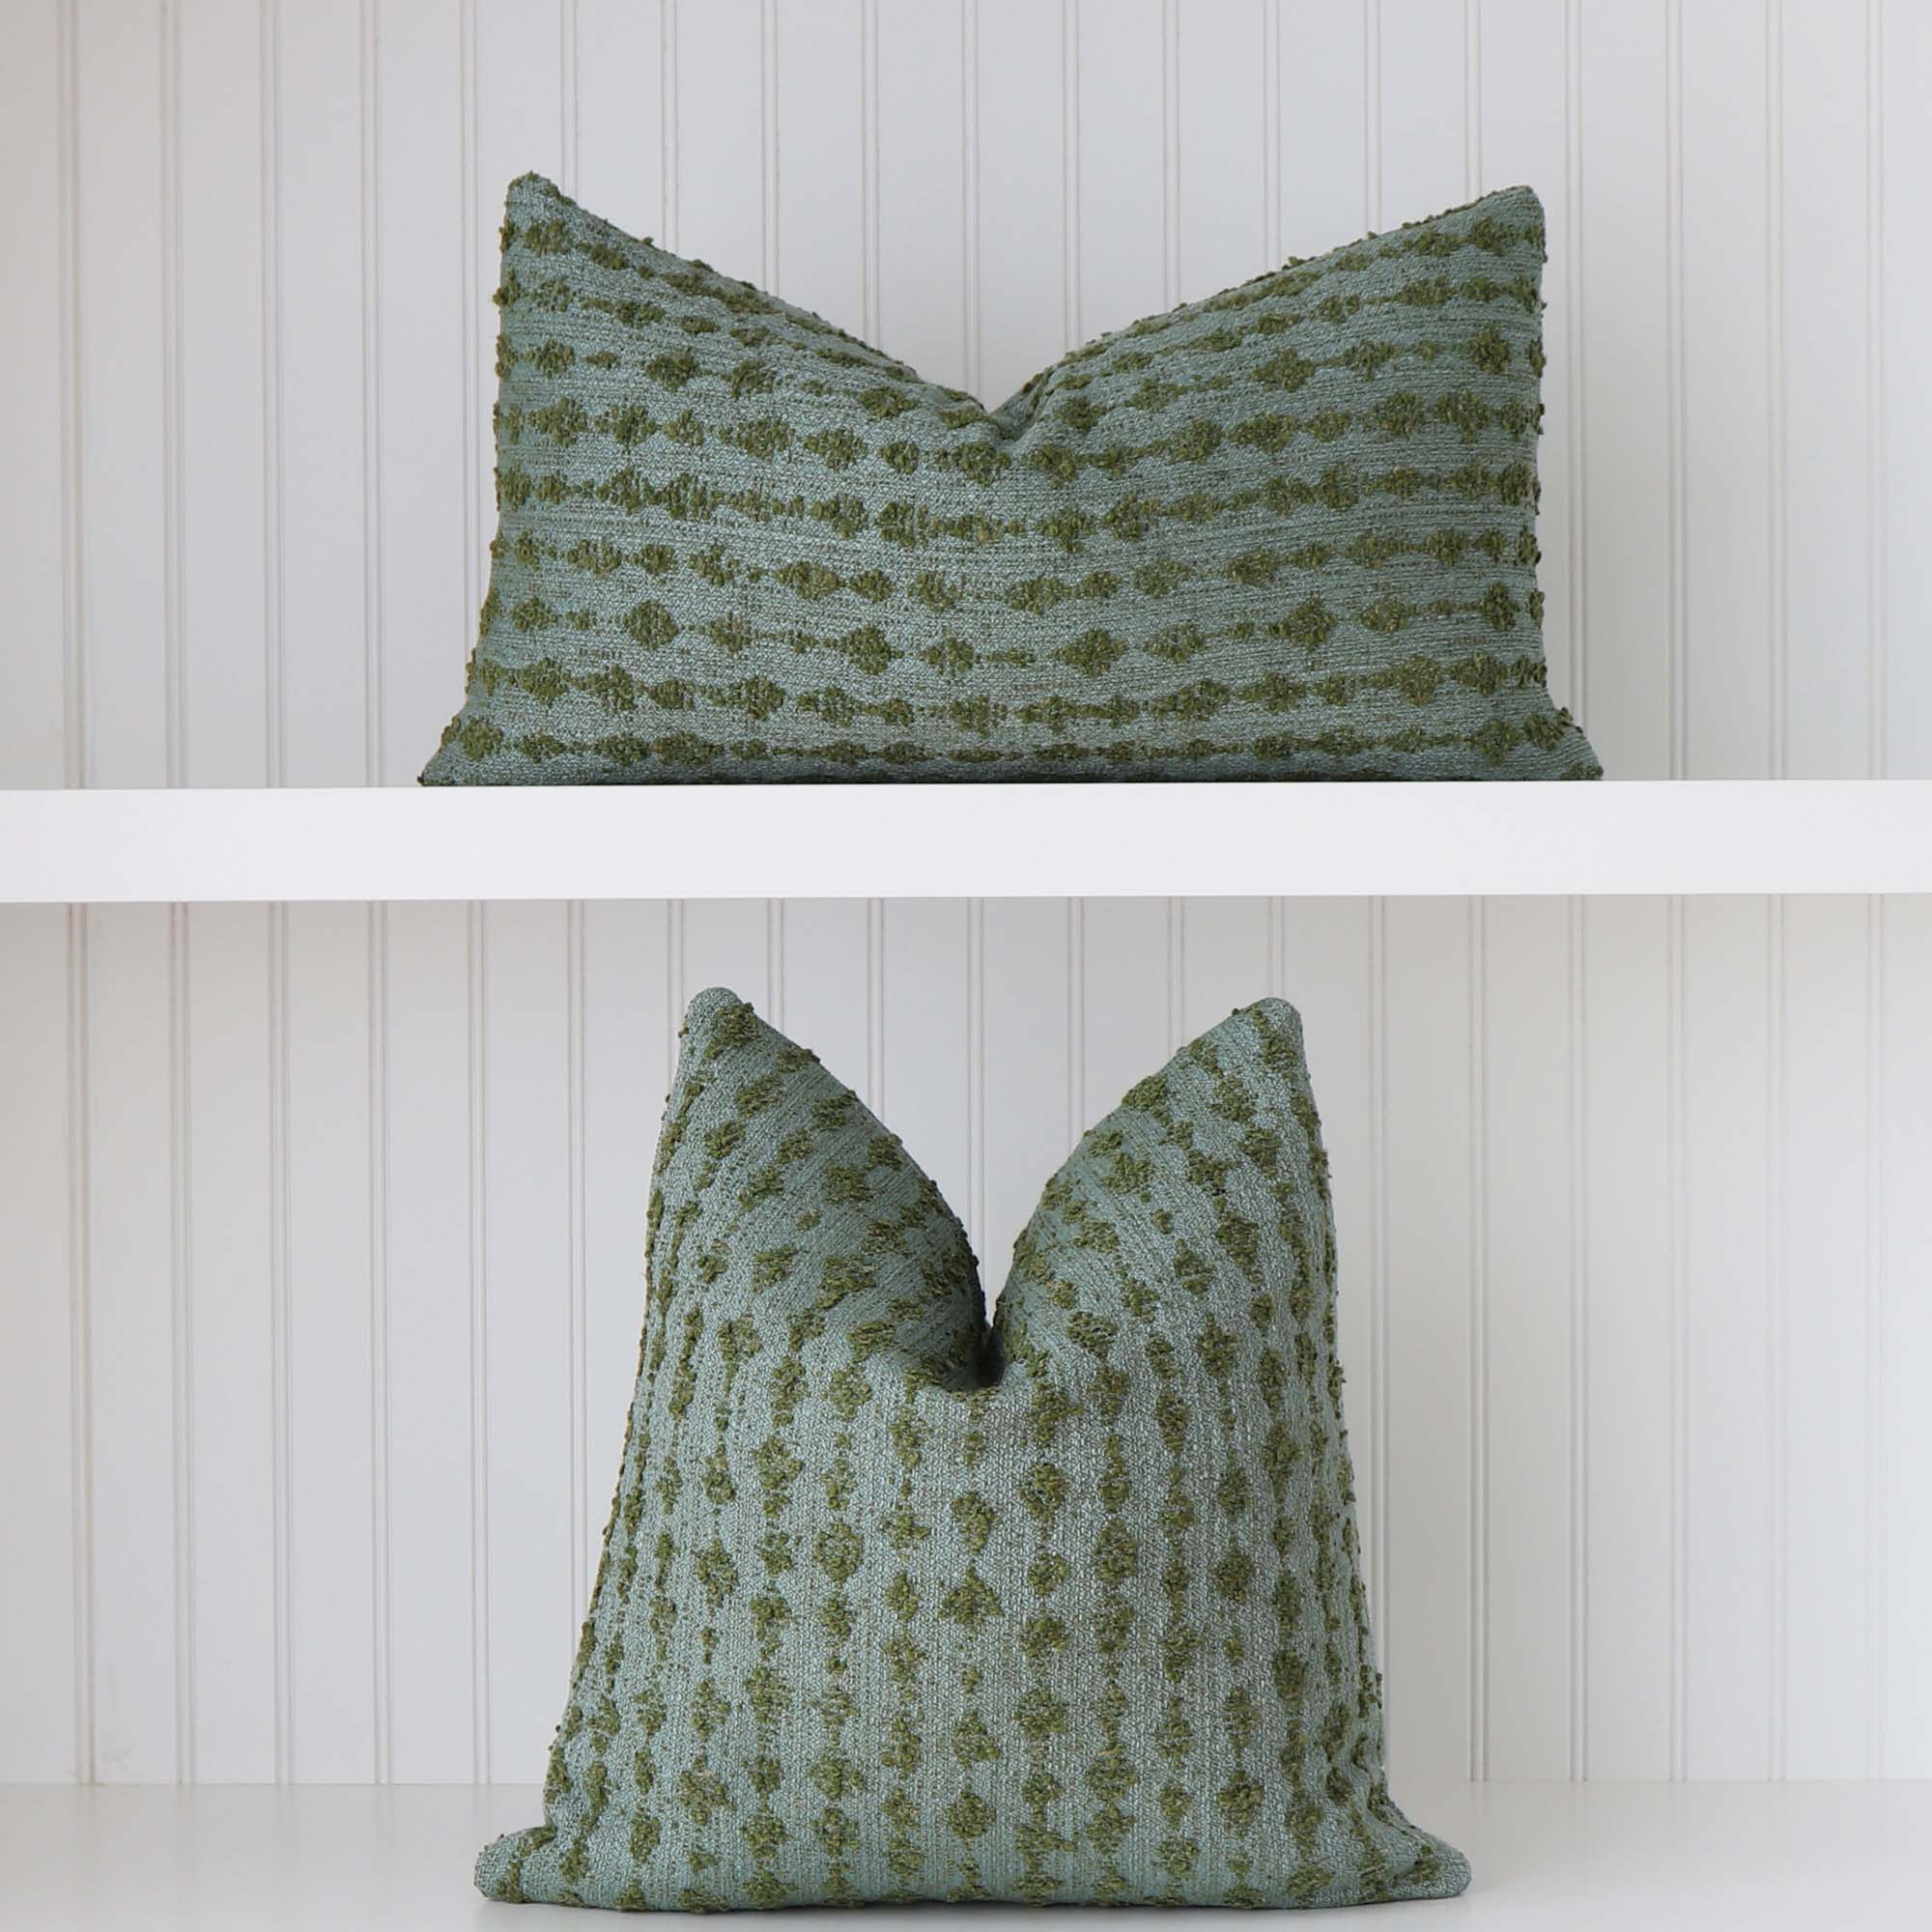 Key Wearstler Serai Envy Green Stripe Boucle Designer Luxury Throw Pillow Cover Available in Square and Lumbar Sizes